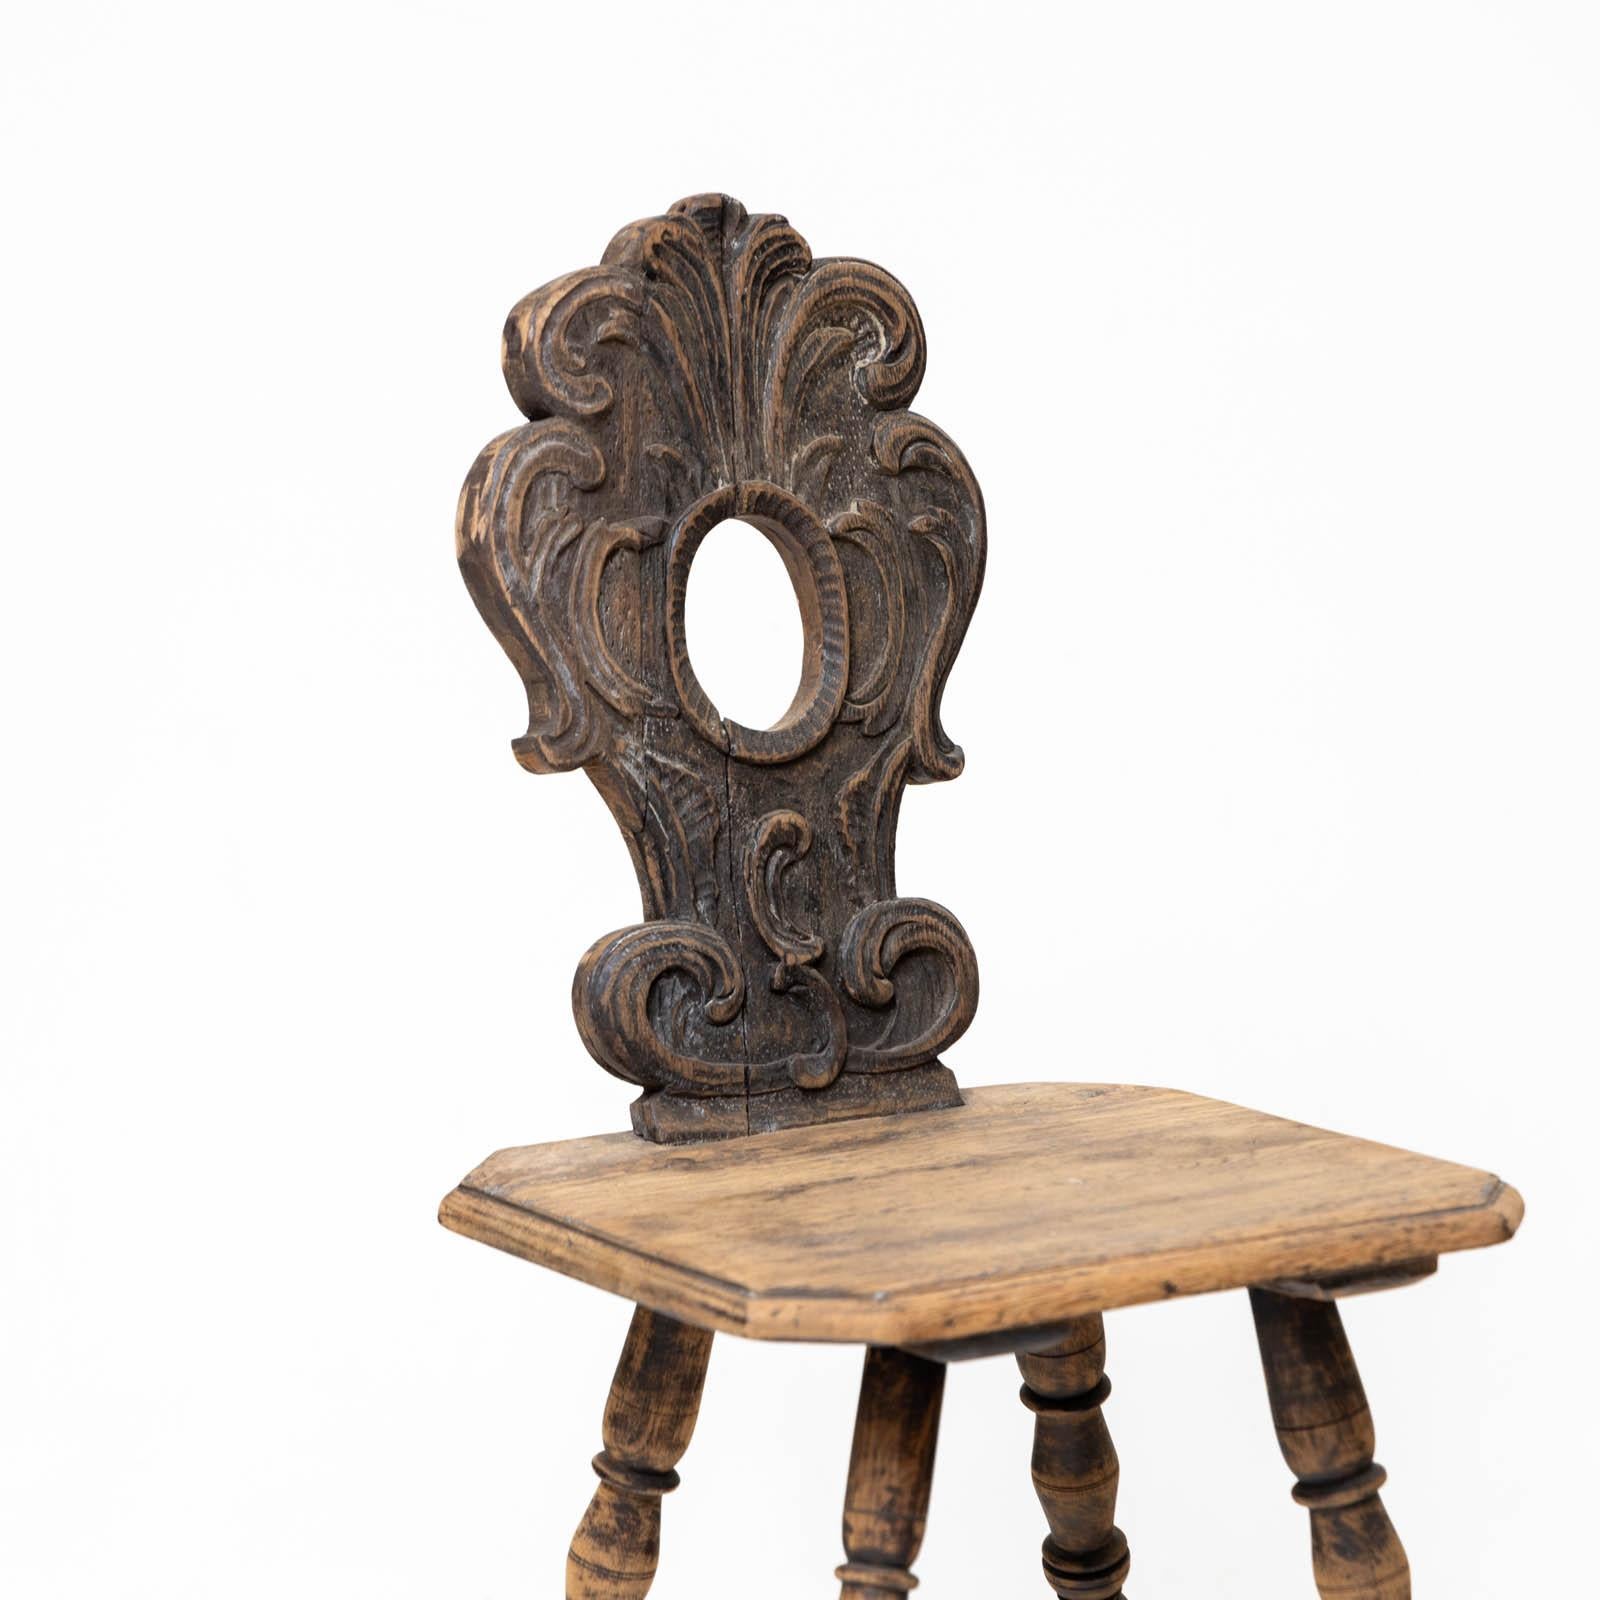 Rustic oak chair with an octagonal seat and turned legs. The backrest has an oval cut-out with carved rocailles.